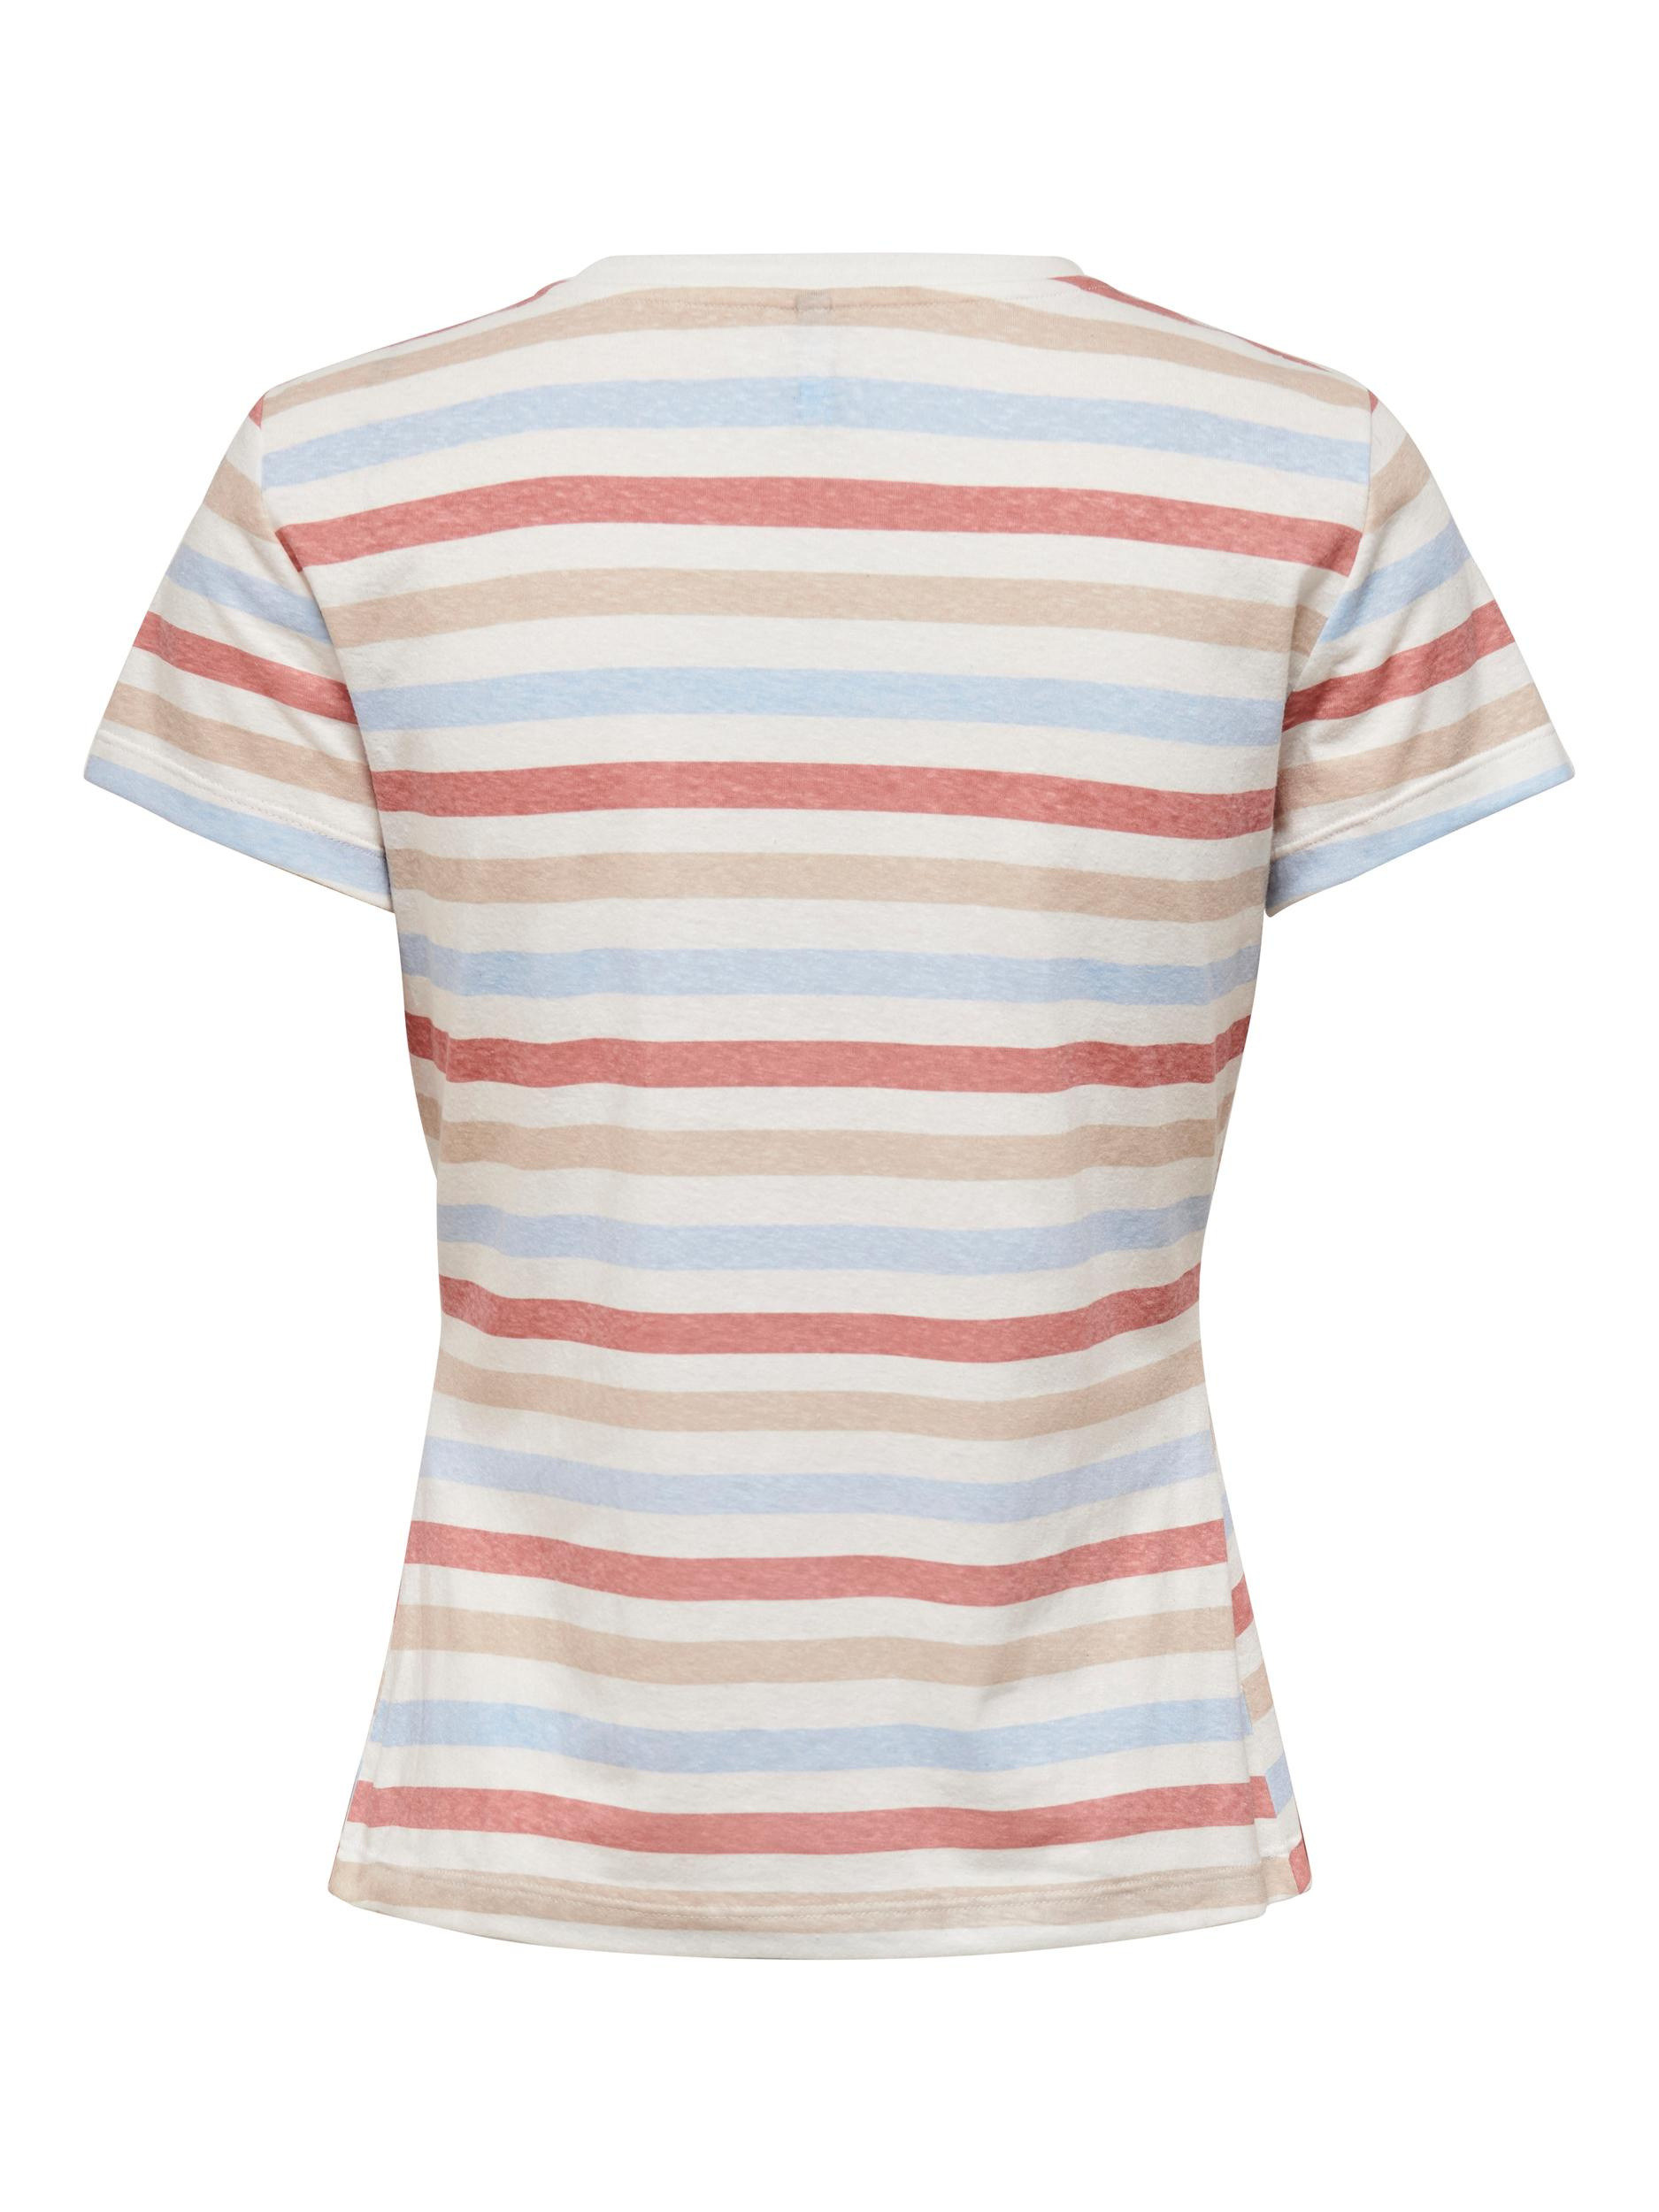 T-shirt a righe, Multicolor, large image number 1